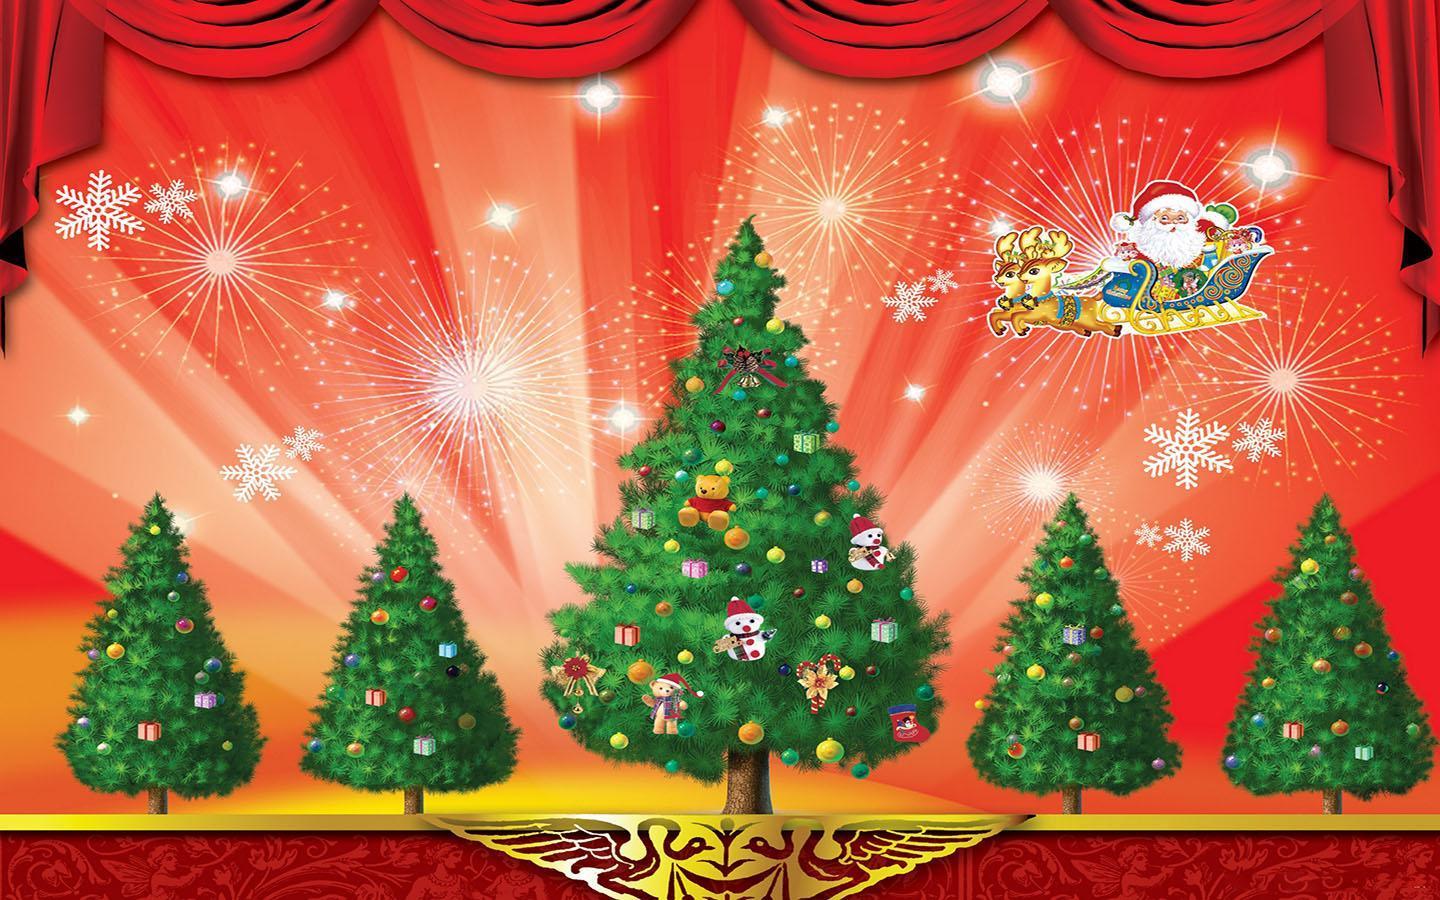 Merry Christmas Wallpaper for Android